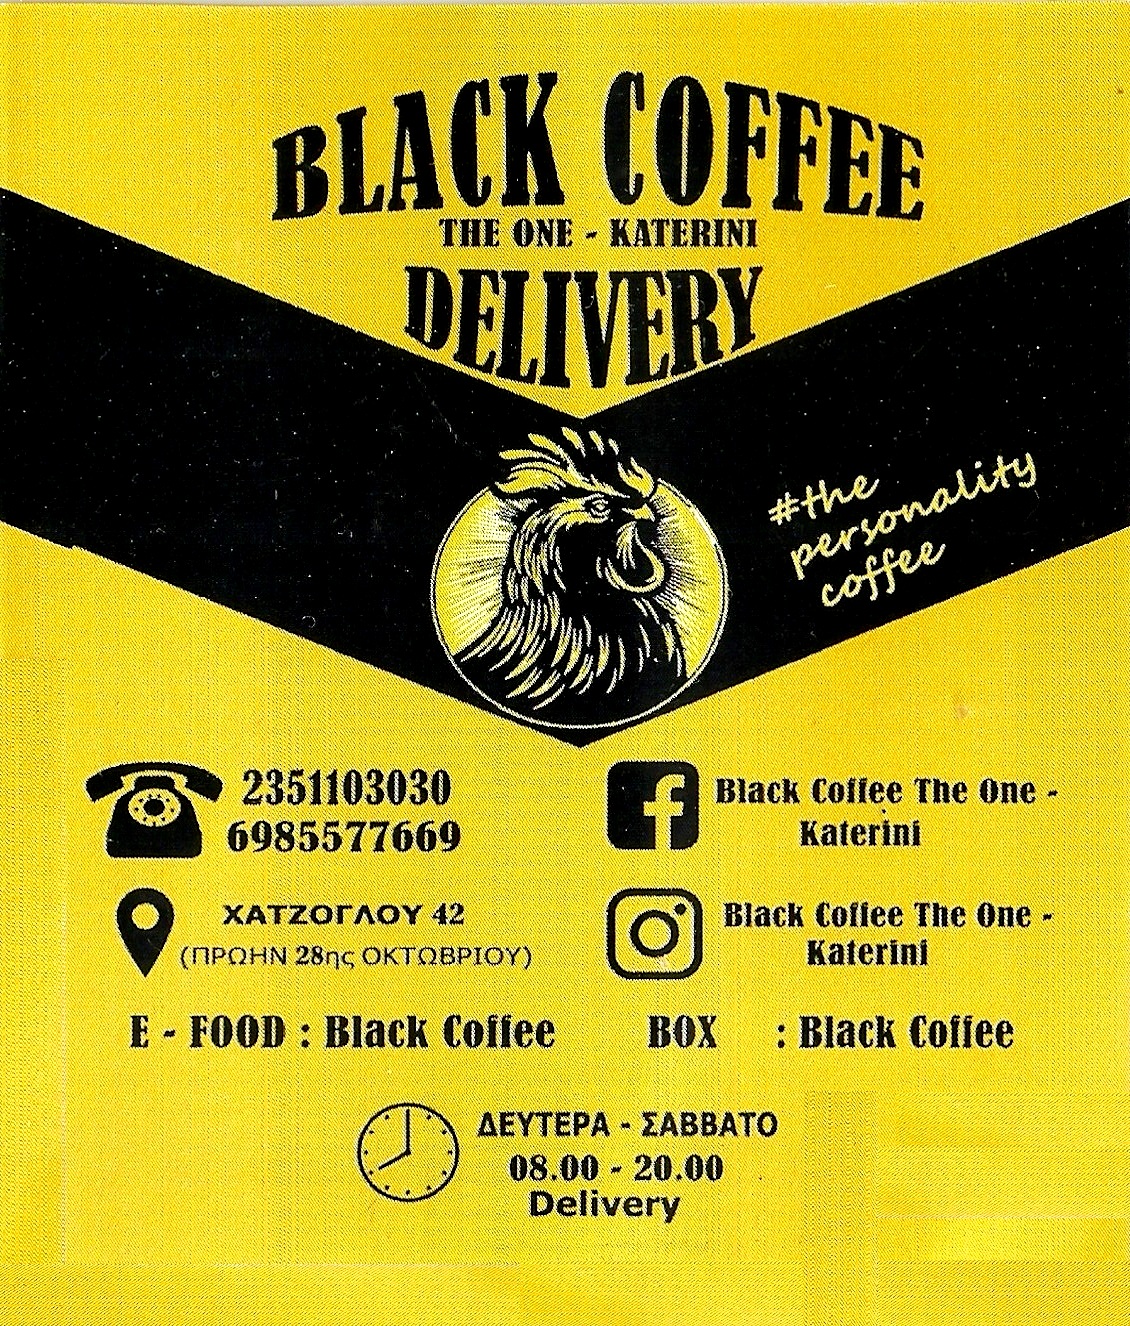 BLACK COFFEE DELIVERY